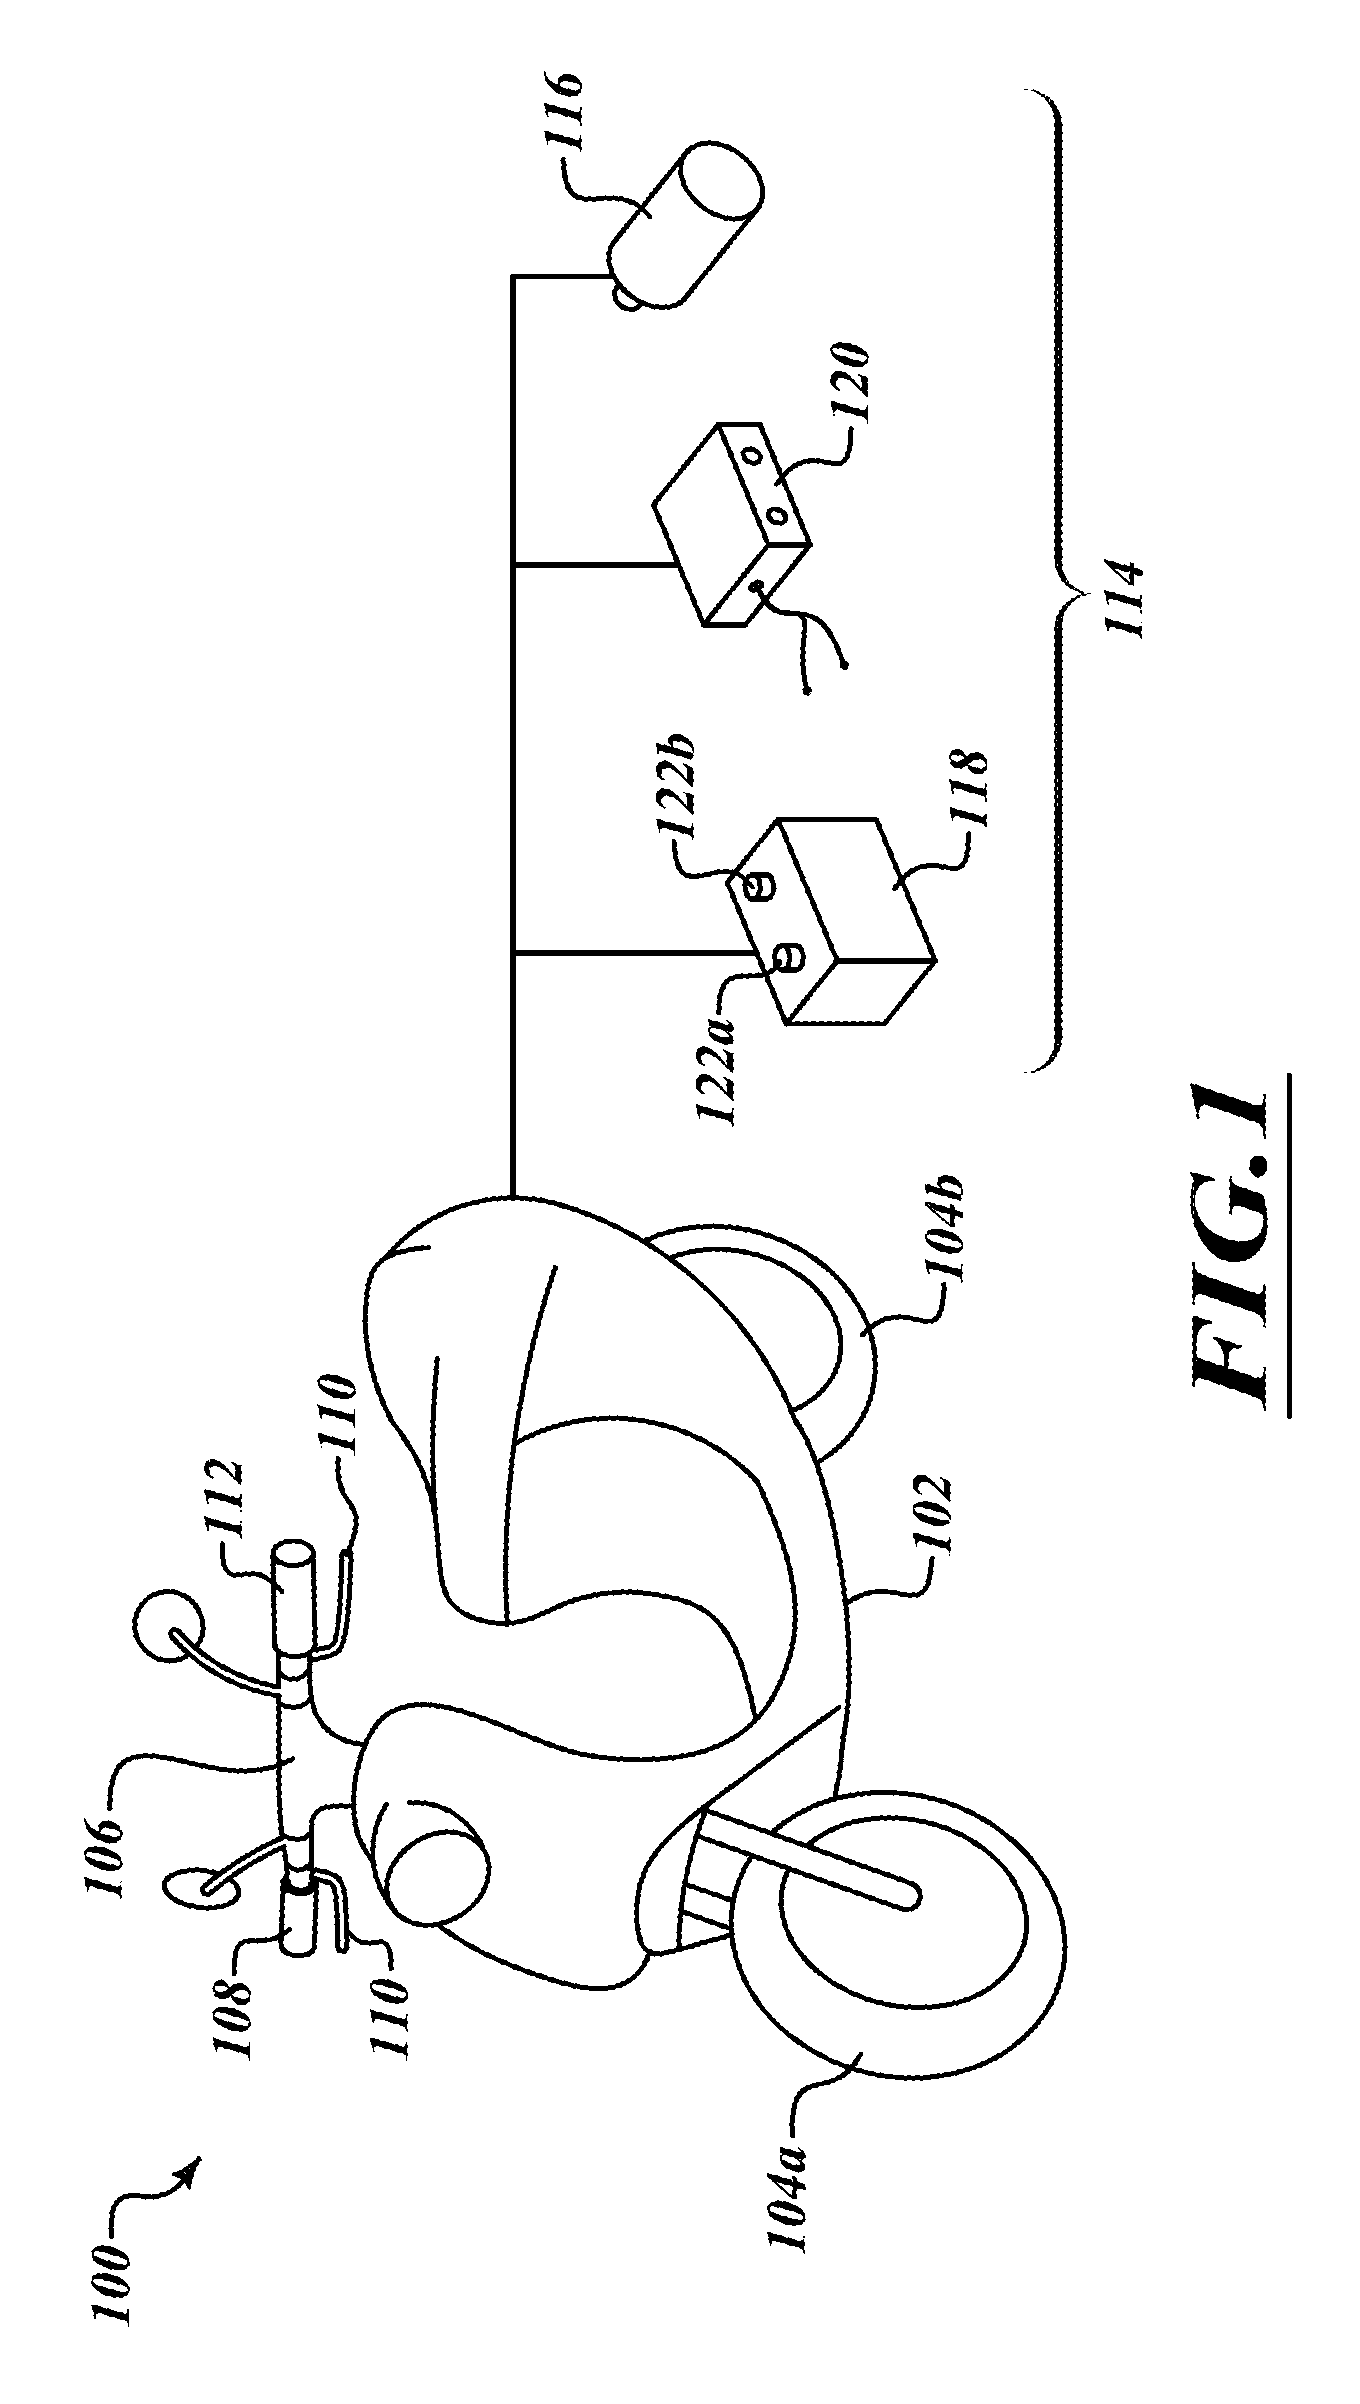 Detectible indication of an electric motor vehicle standby mode